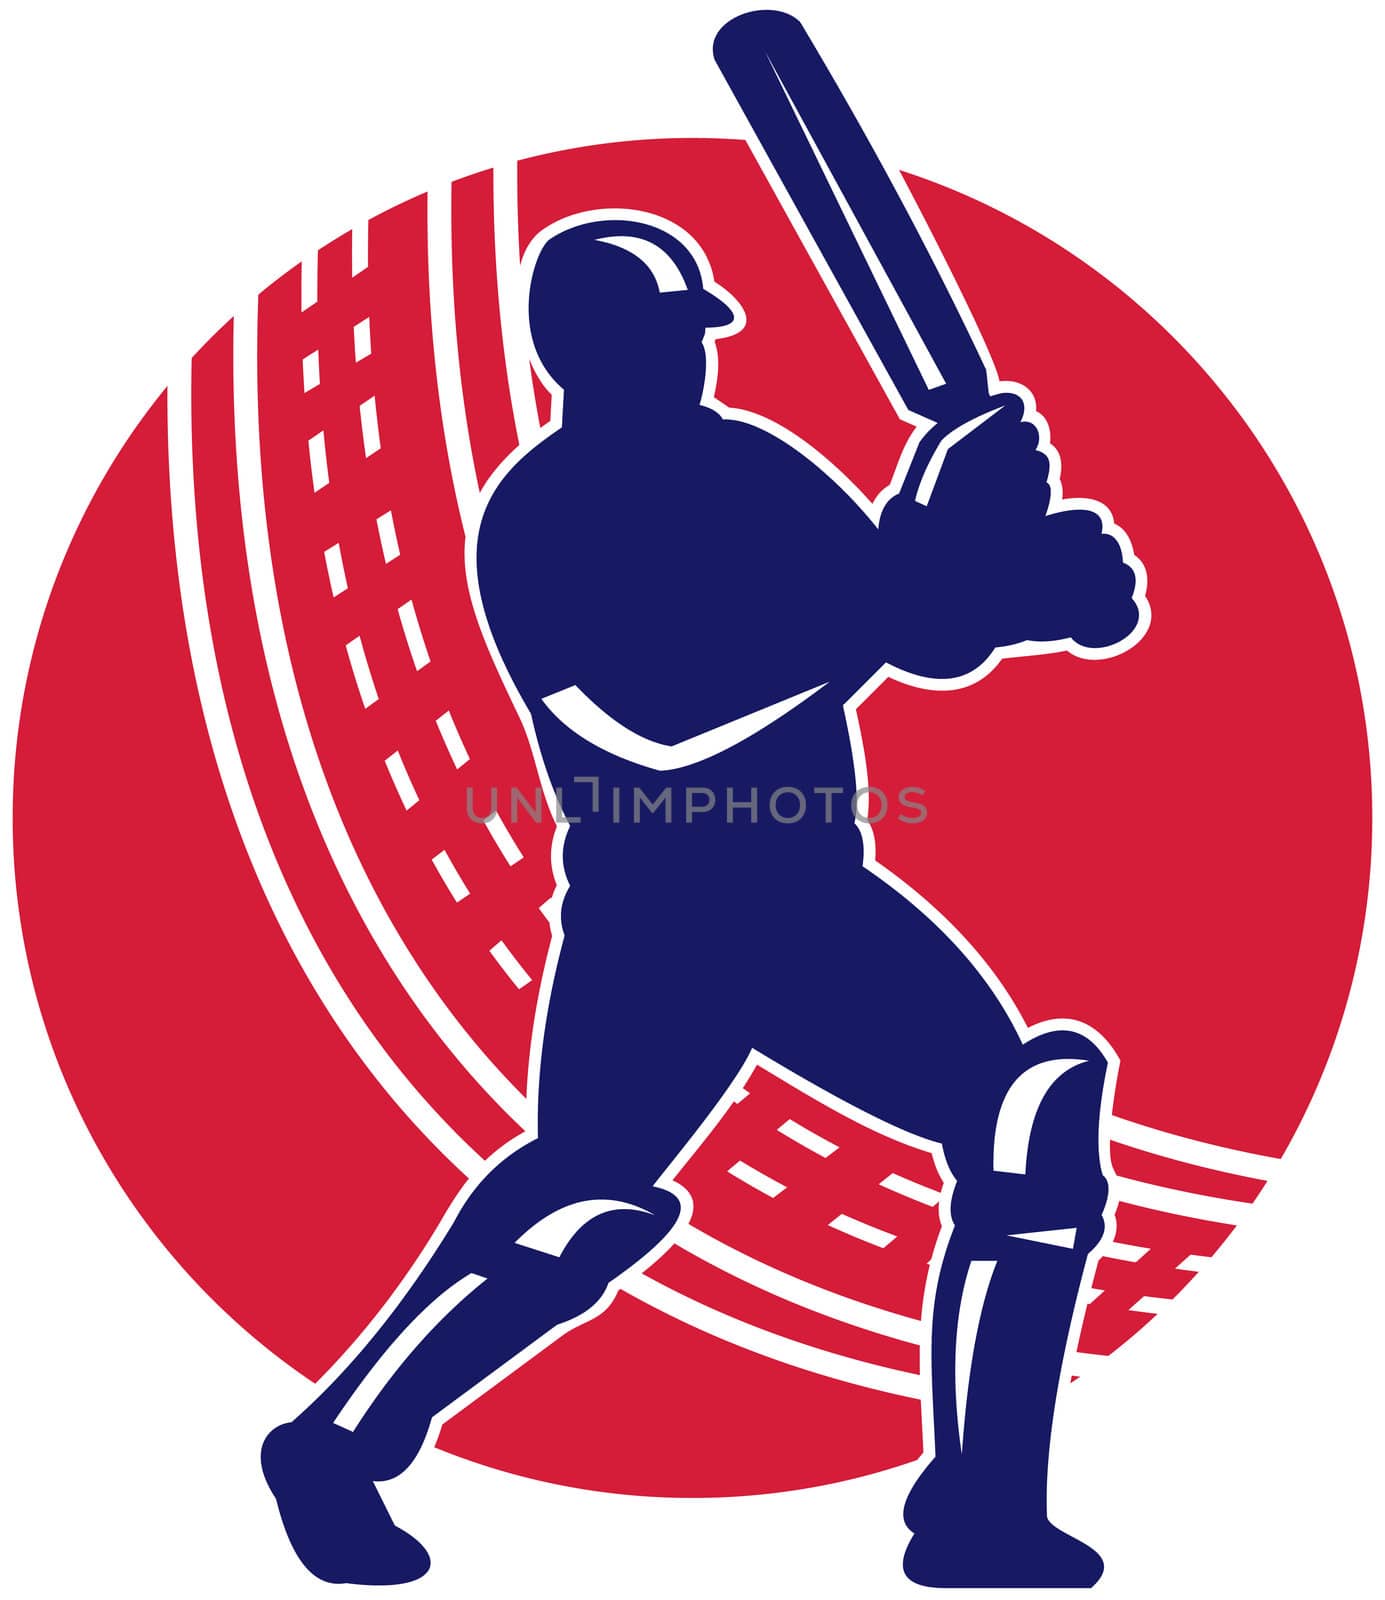 illustration of a cricket batsman batting front view with ball in background done in retro style 